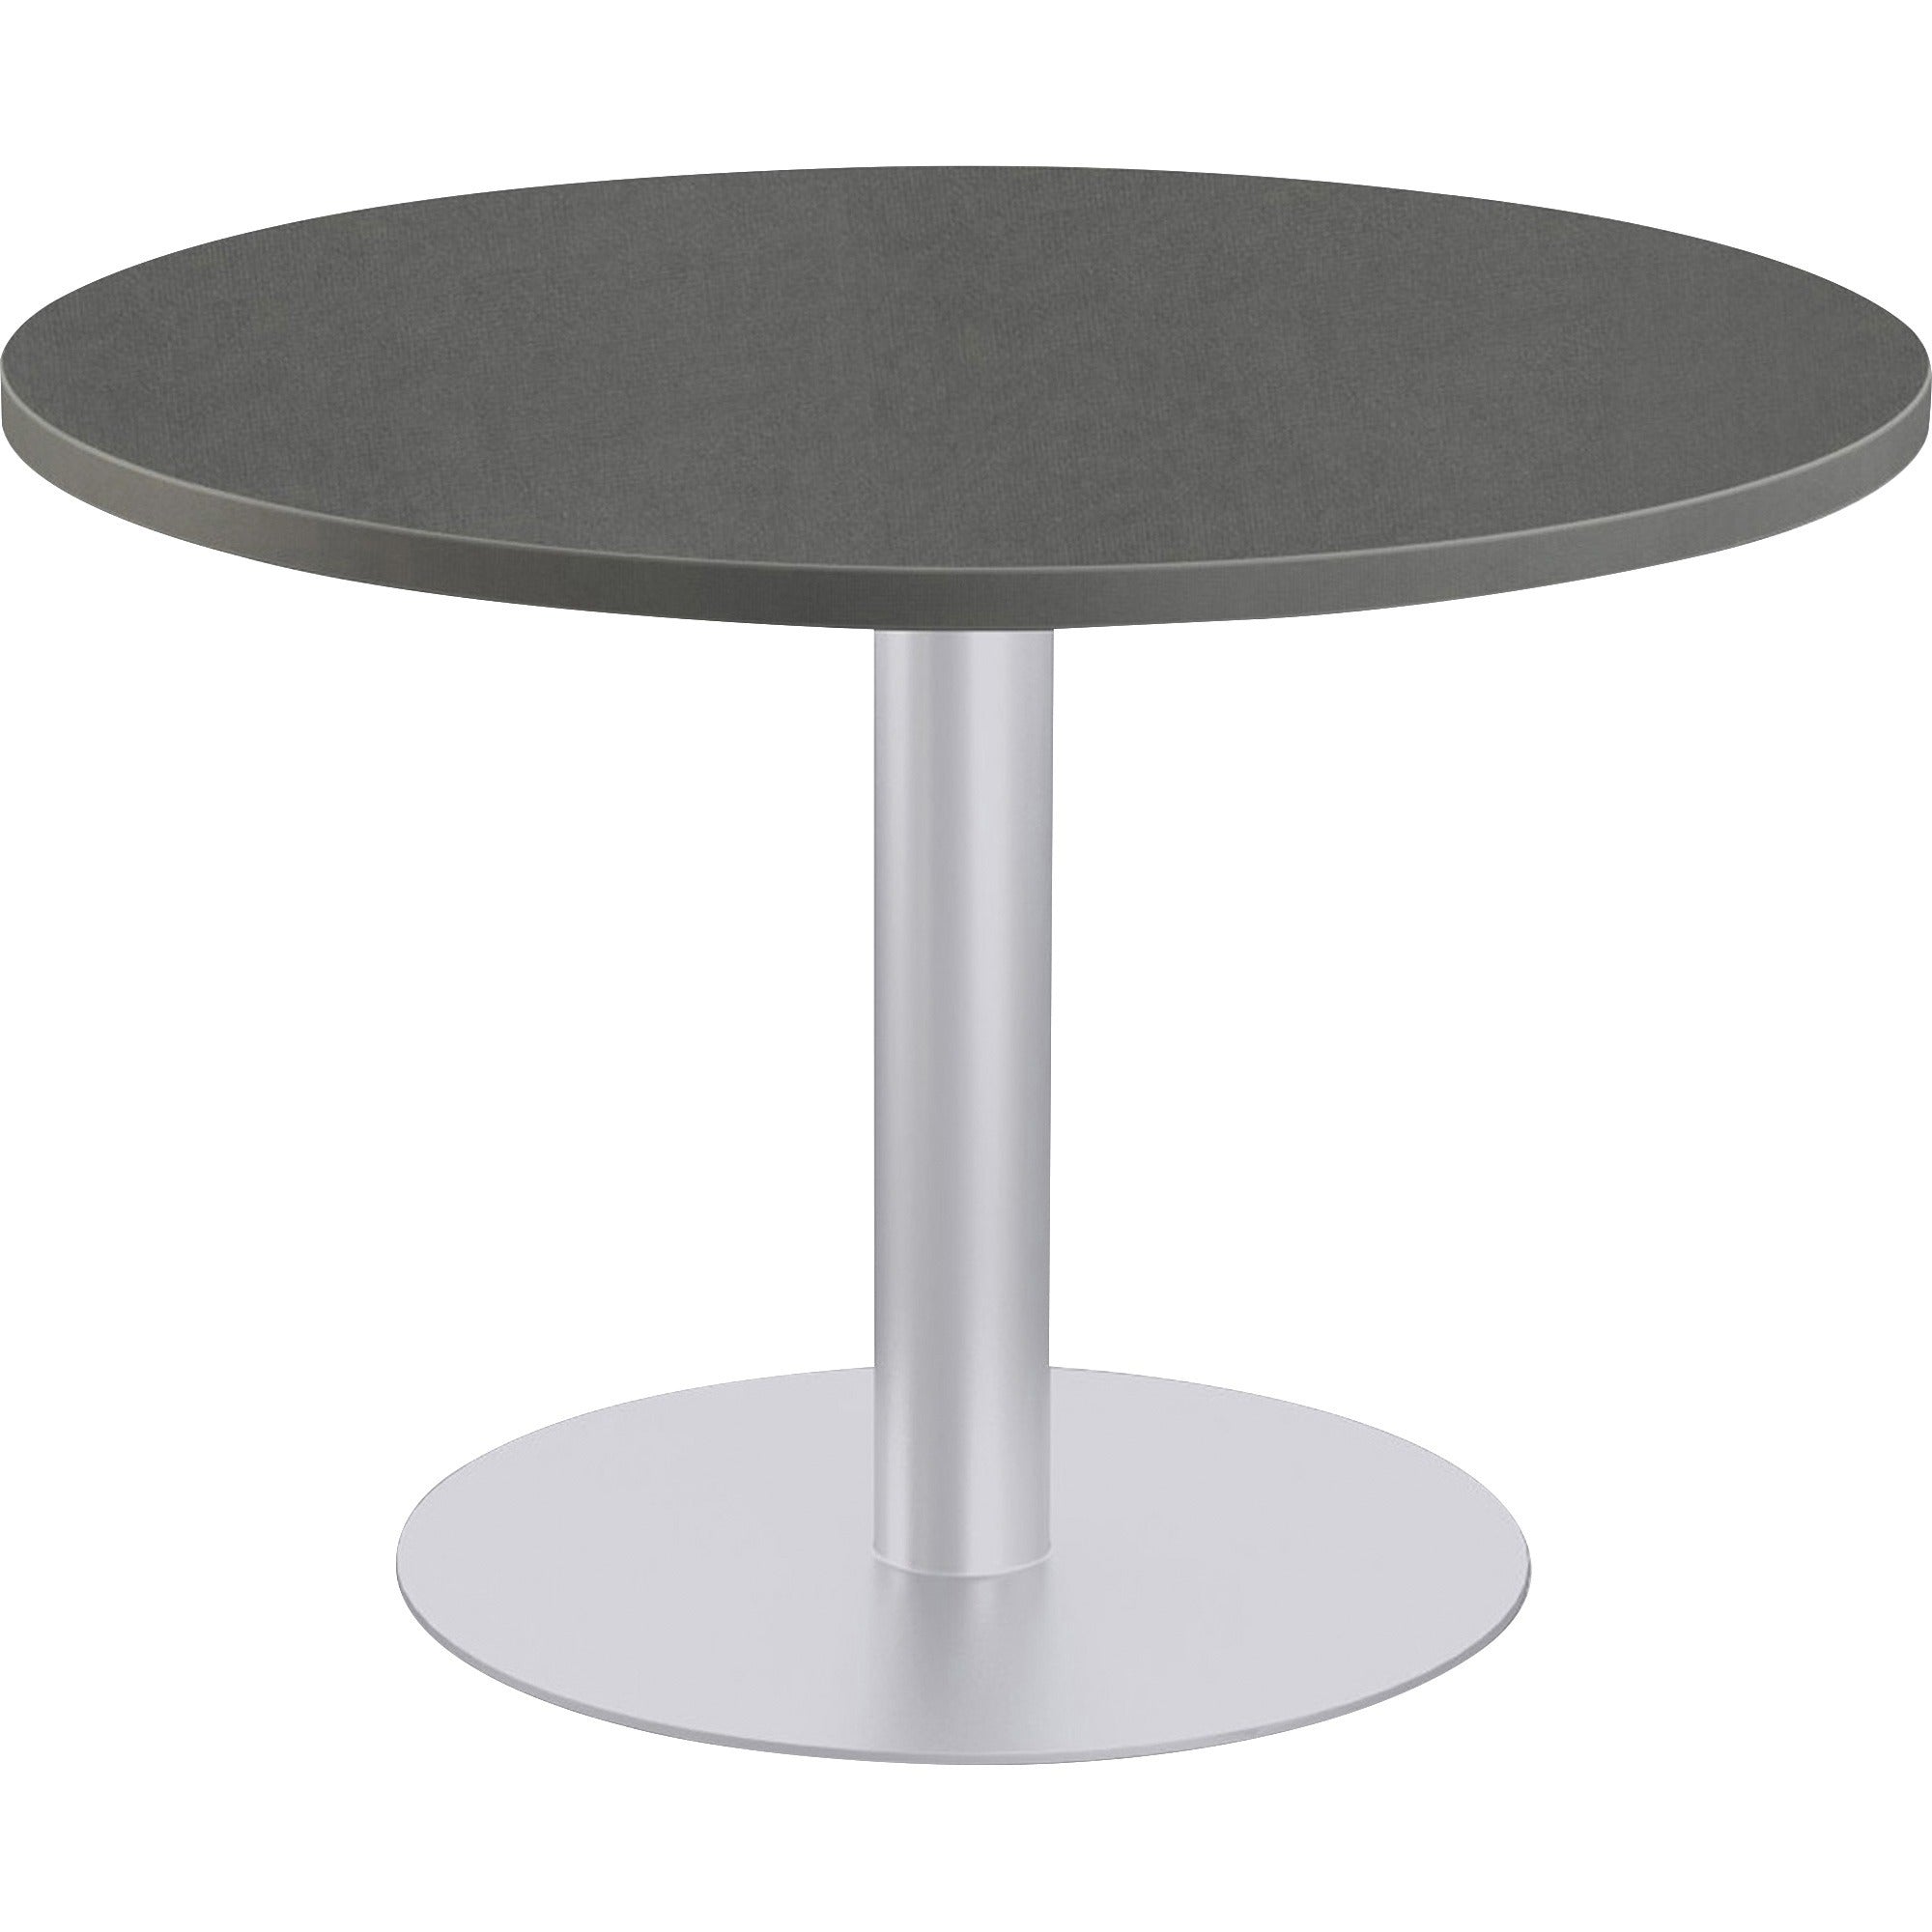 special-t-sienna-cafe-table-for-table-topgray-round-top-powder-coated-metallic-silver-base-x-125-table-top-thickness-x-42-table-top-diameter-29-height-assembly-required-high-pressure-laminate-hpl-particleboard-top-material-1-eac_sctsien42sm - 1